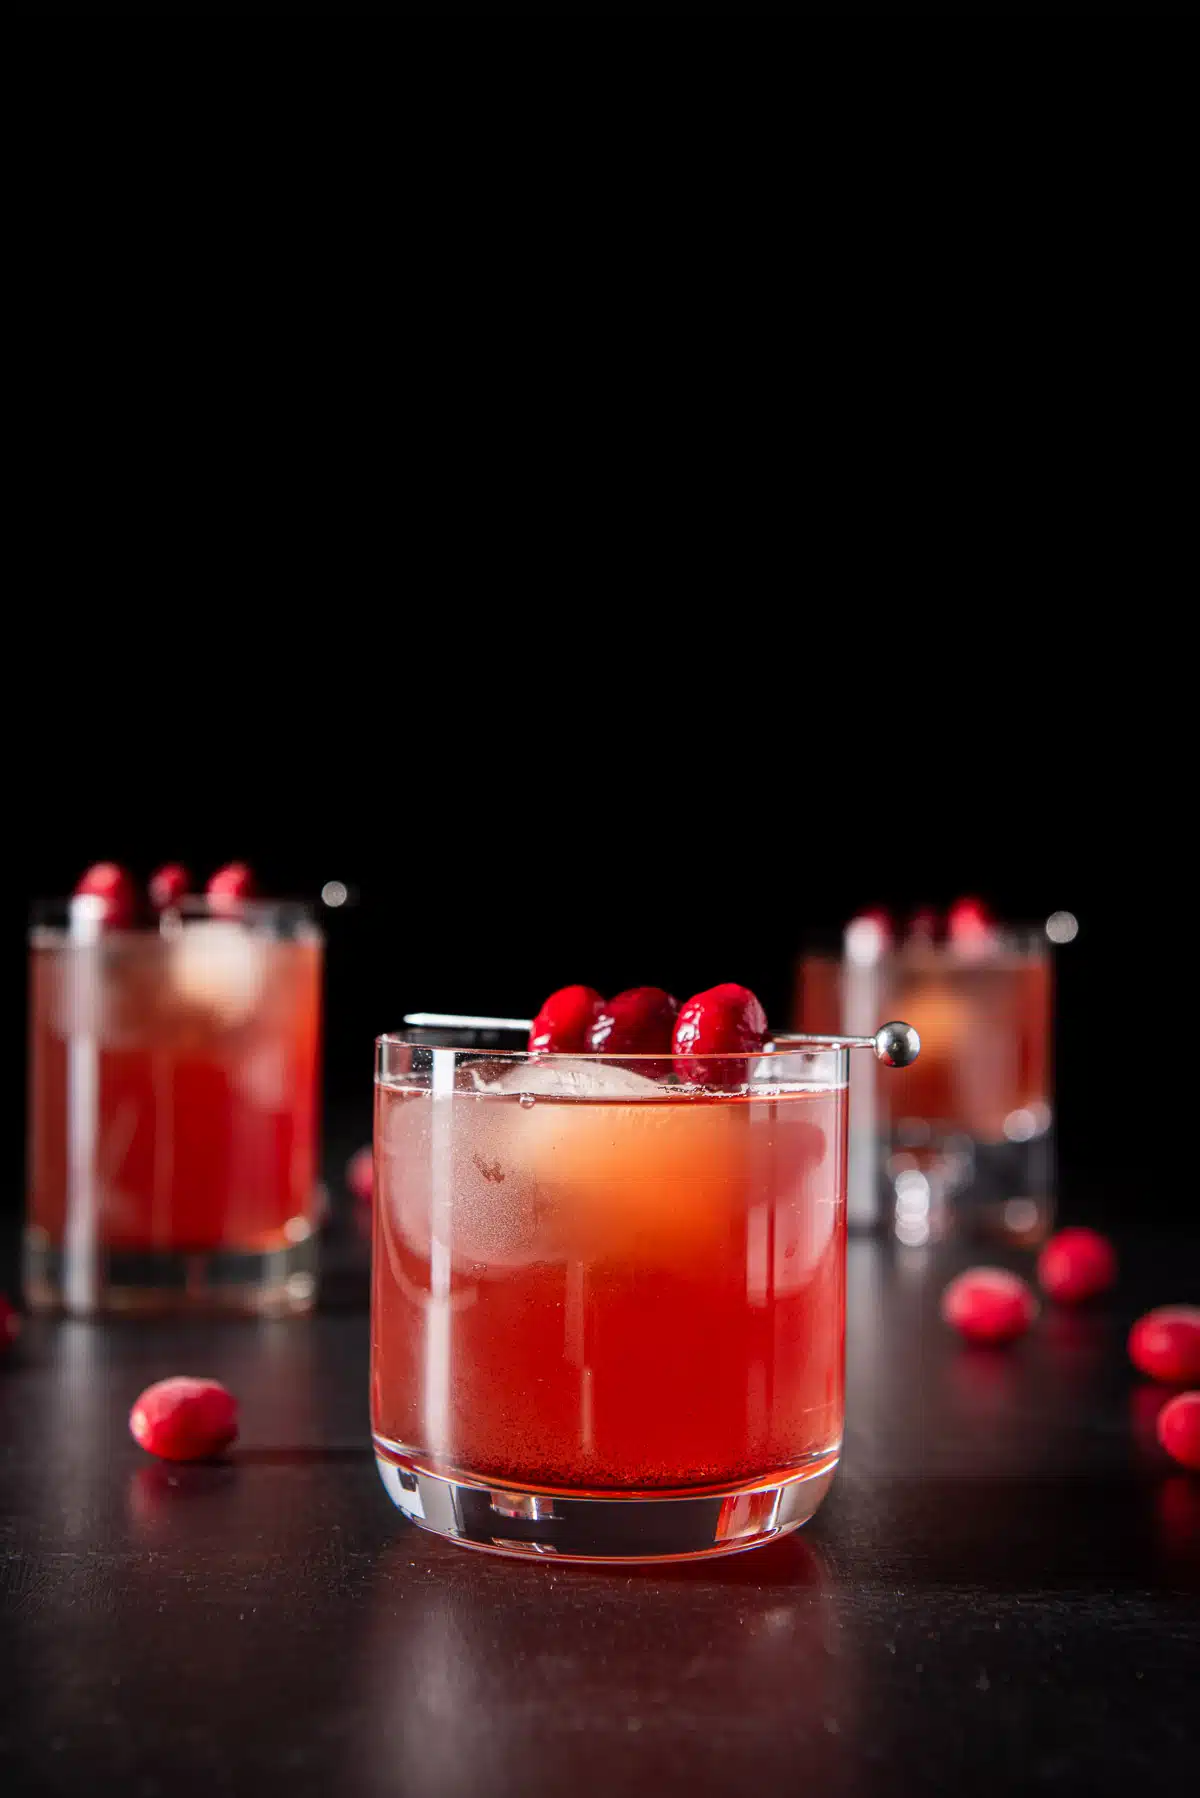 Vertical view of the bourbon cocktail with cranberries as garnish